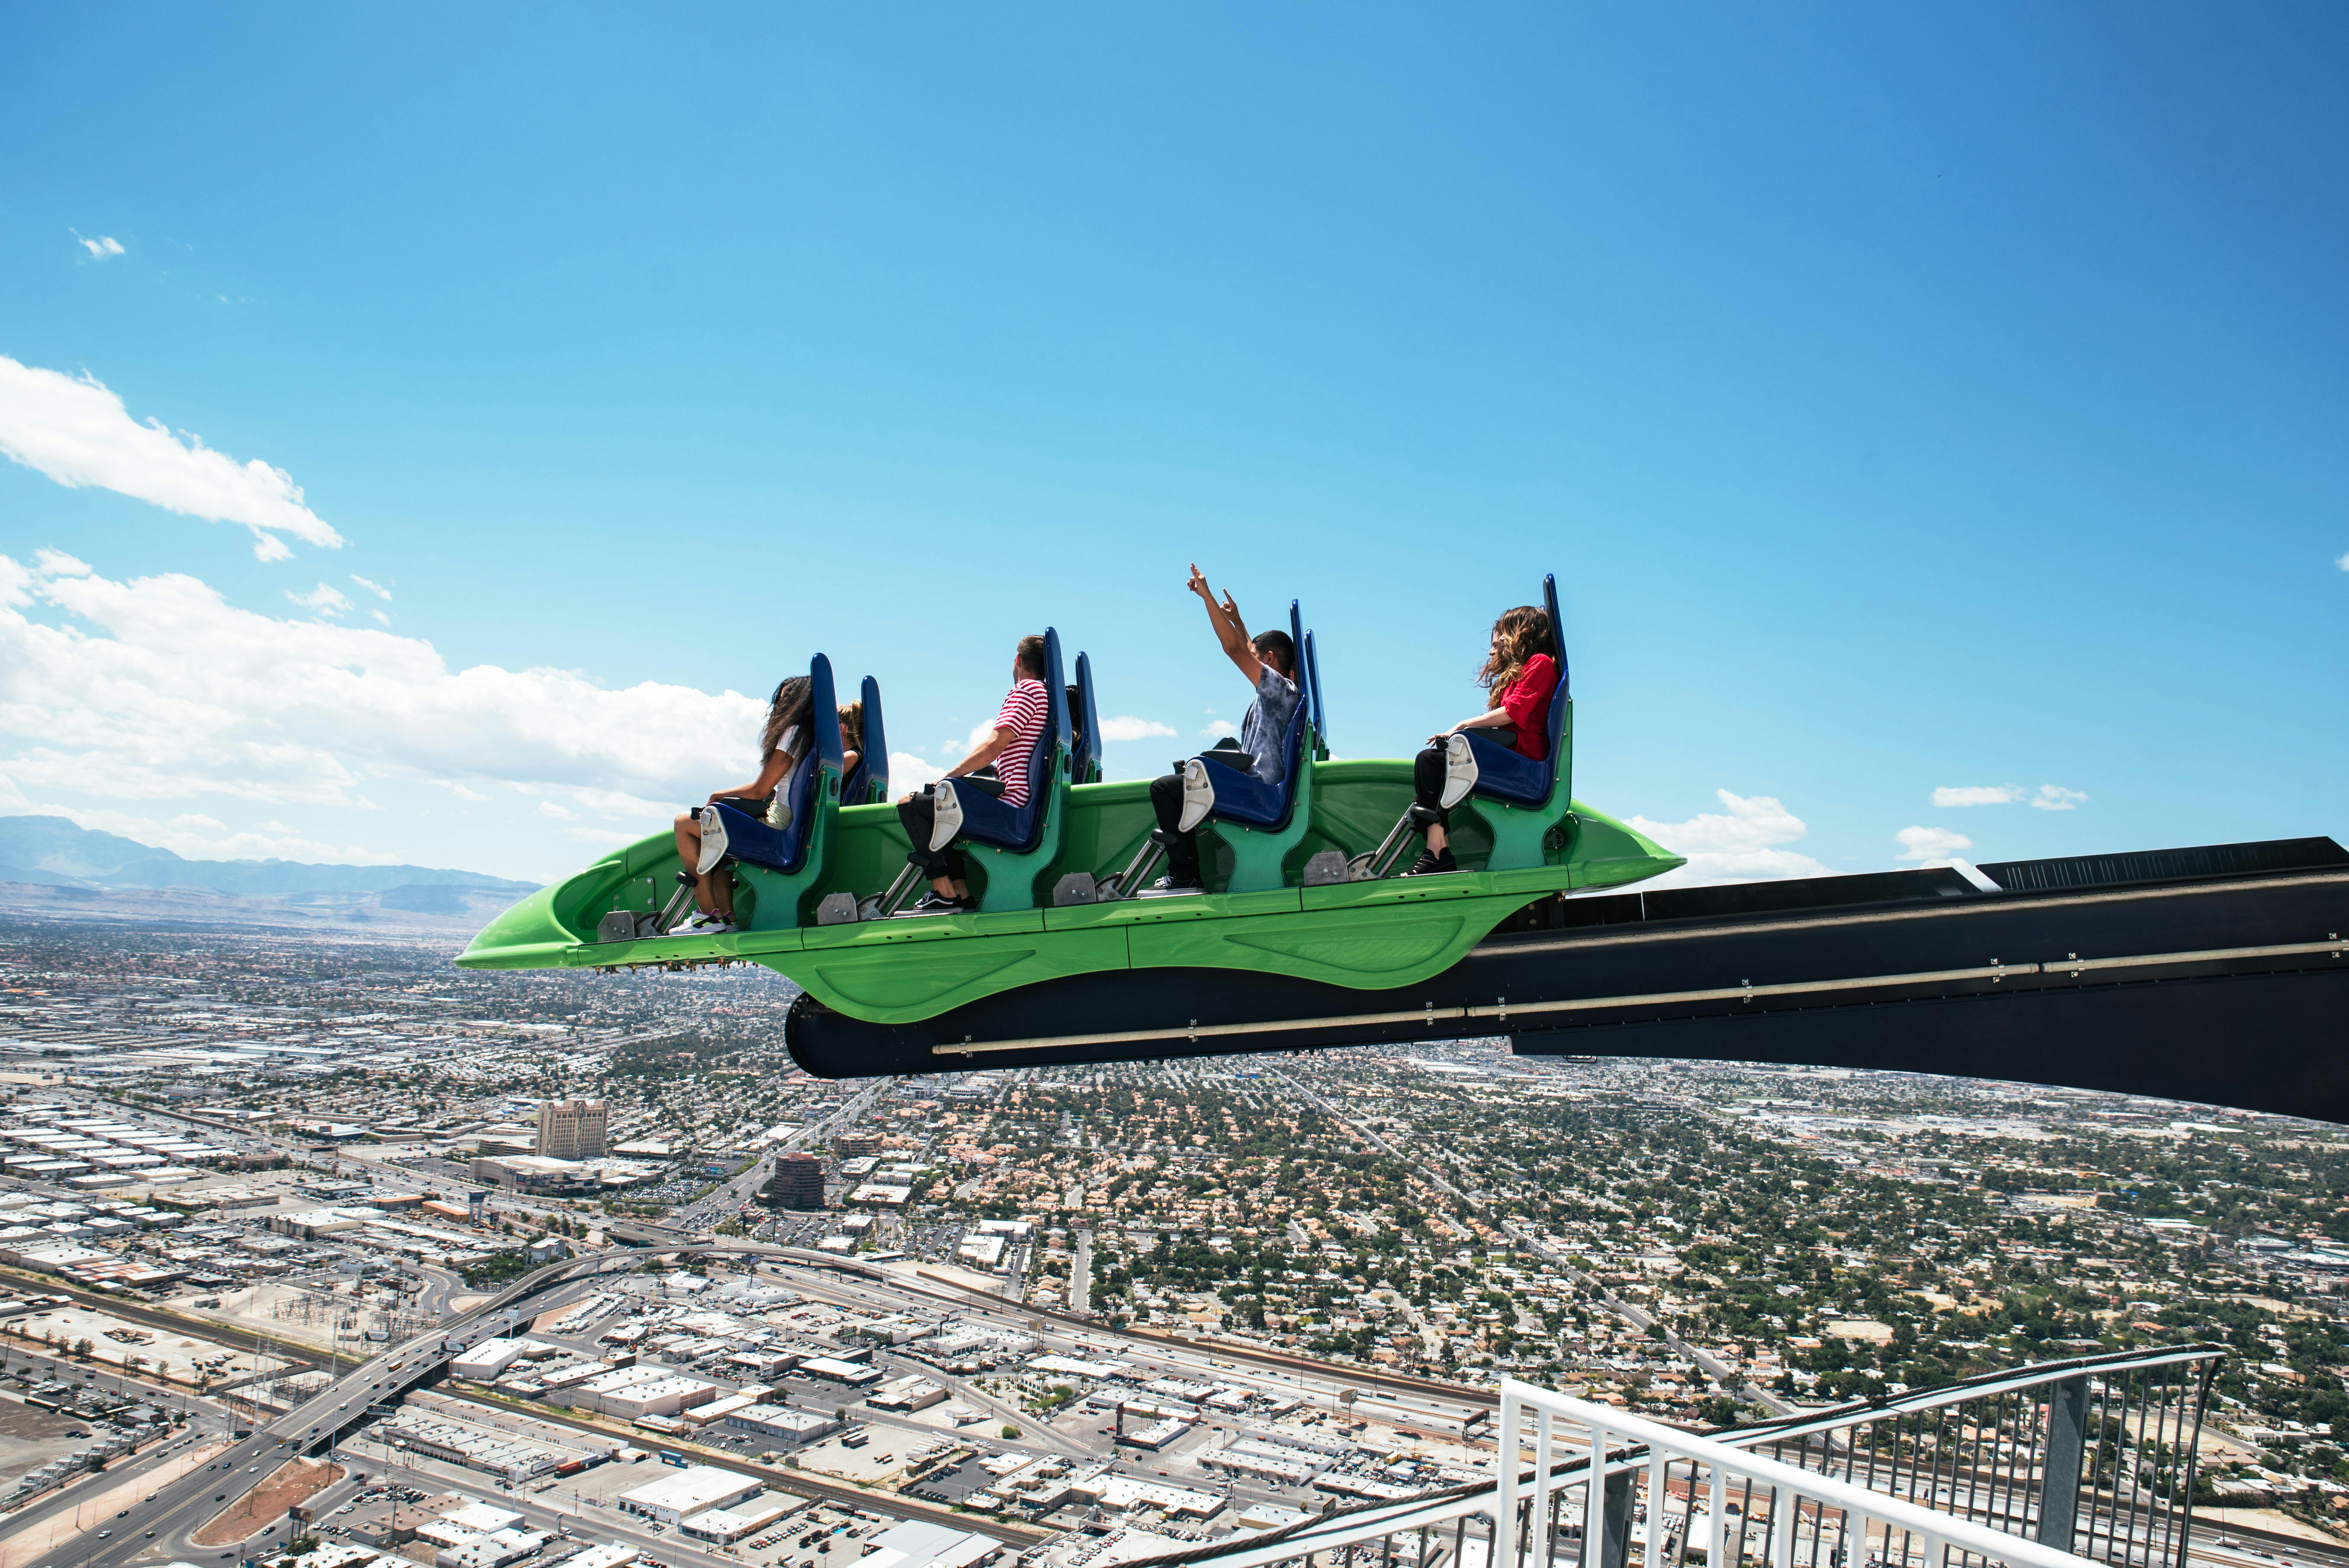 In Las Vegas, Roller Coasters Adds New Thrills - The New York Times